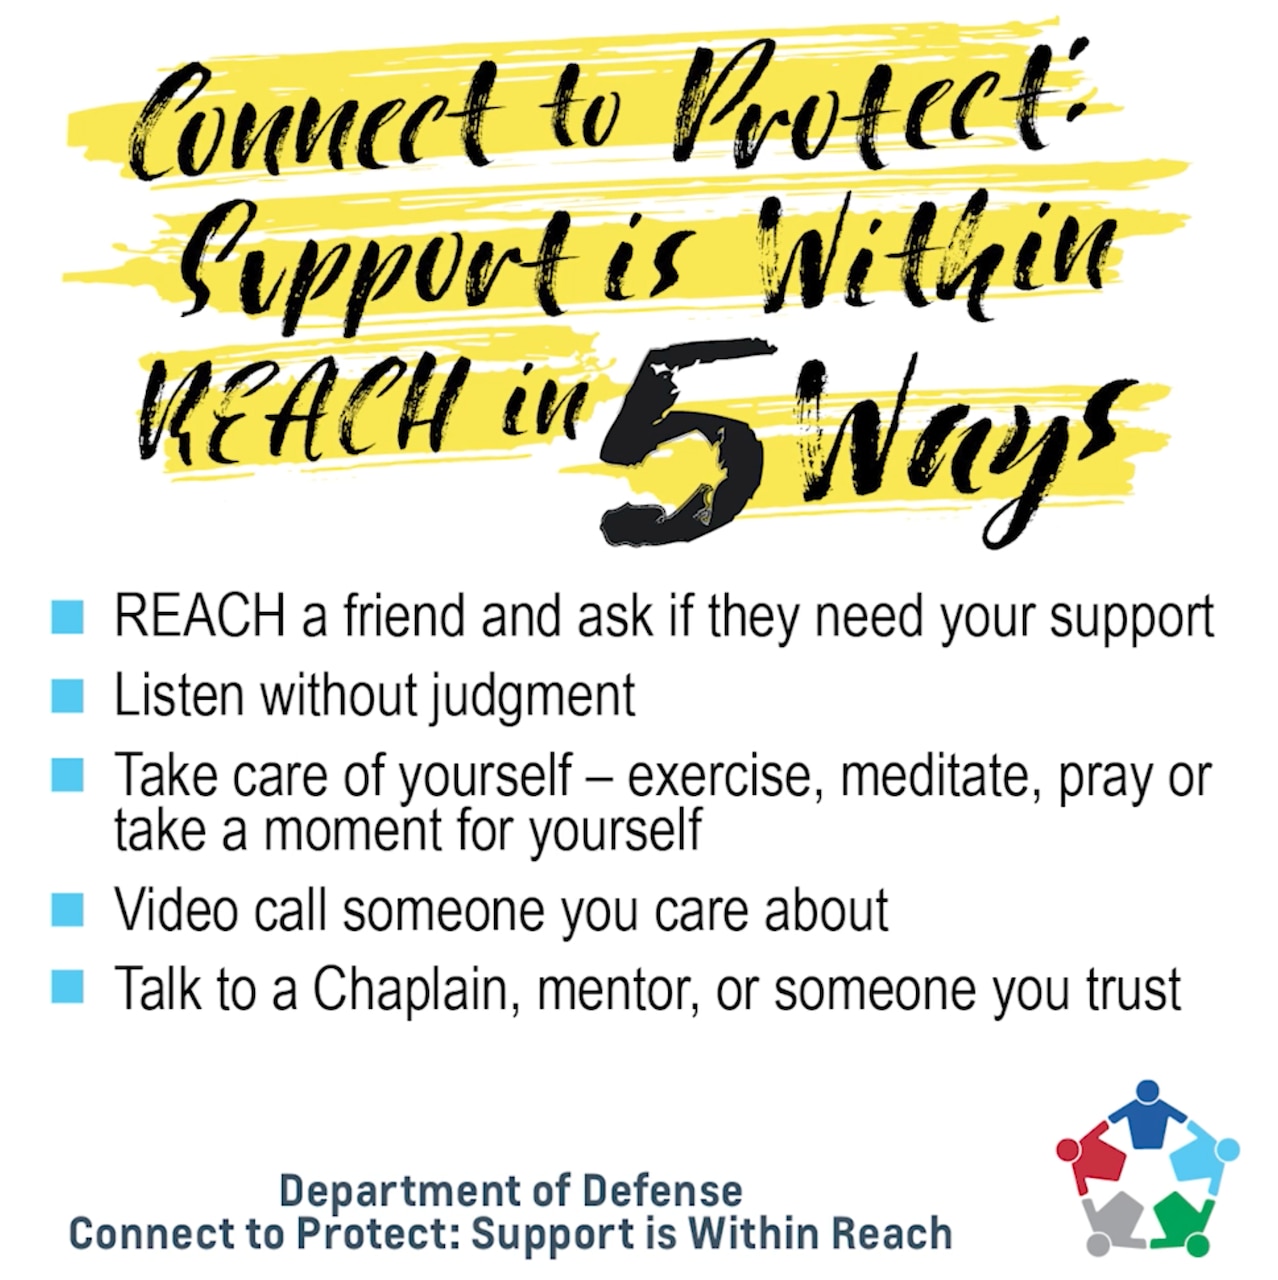 Connect to Protect: Support is within reach in 5 ways graphic.